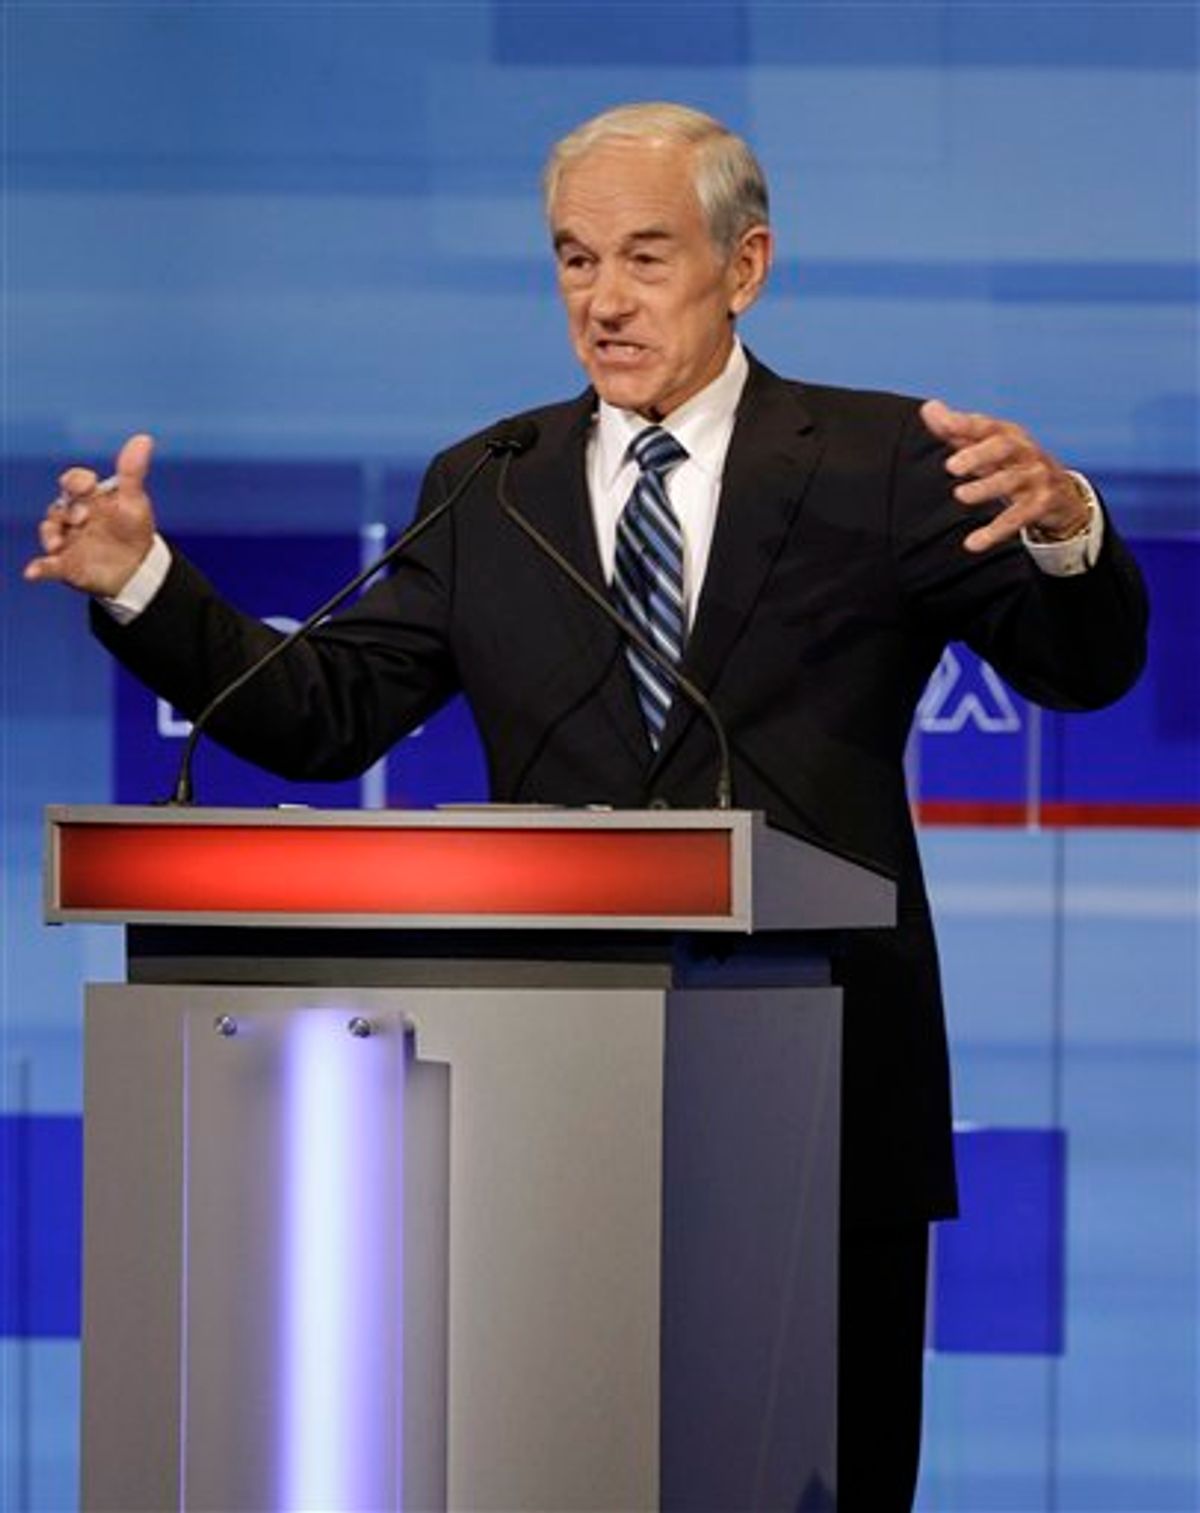 Republican presidential candidate Rep. Ron Paul, R-Texas, speaks during the Iowa GOP/Fox News Debate at the CY Stephens Auditorium in Ames, Iowa, Thursday, Aug. 11, 2011. (AP Photo/Charlie Neibergall, Pool)   (AP)